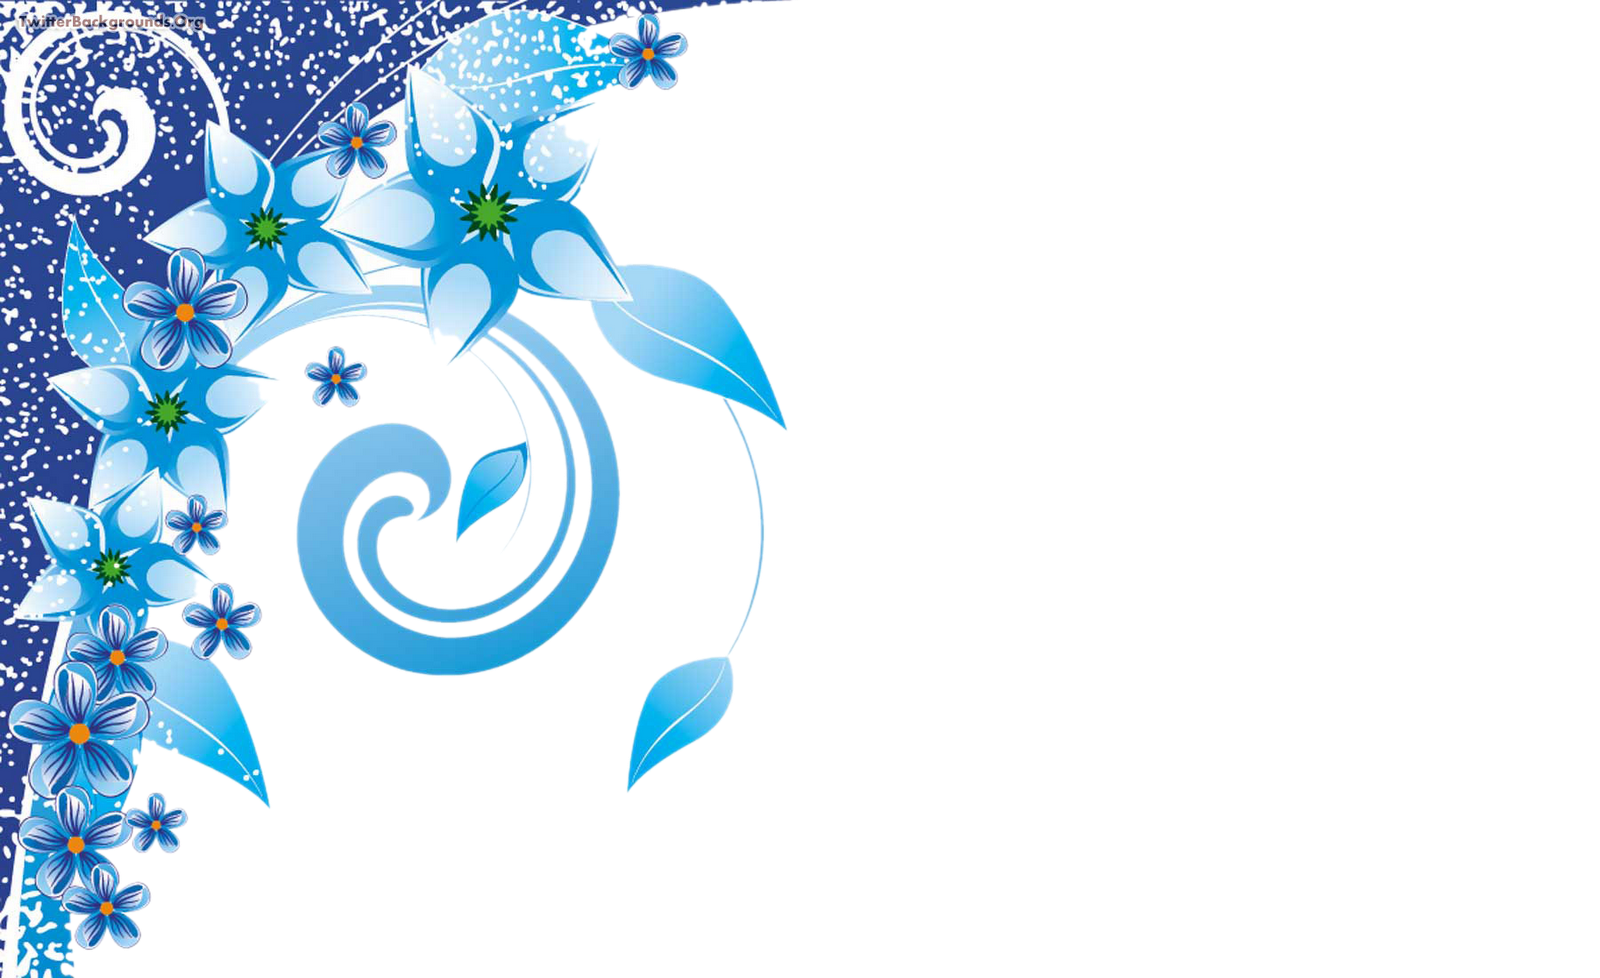 Photoshop Png Frames Wallpaper Designs Ice Blue Flowers And Swirls